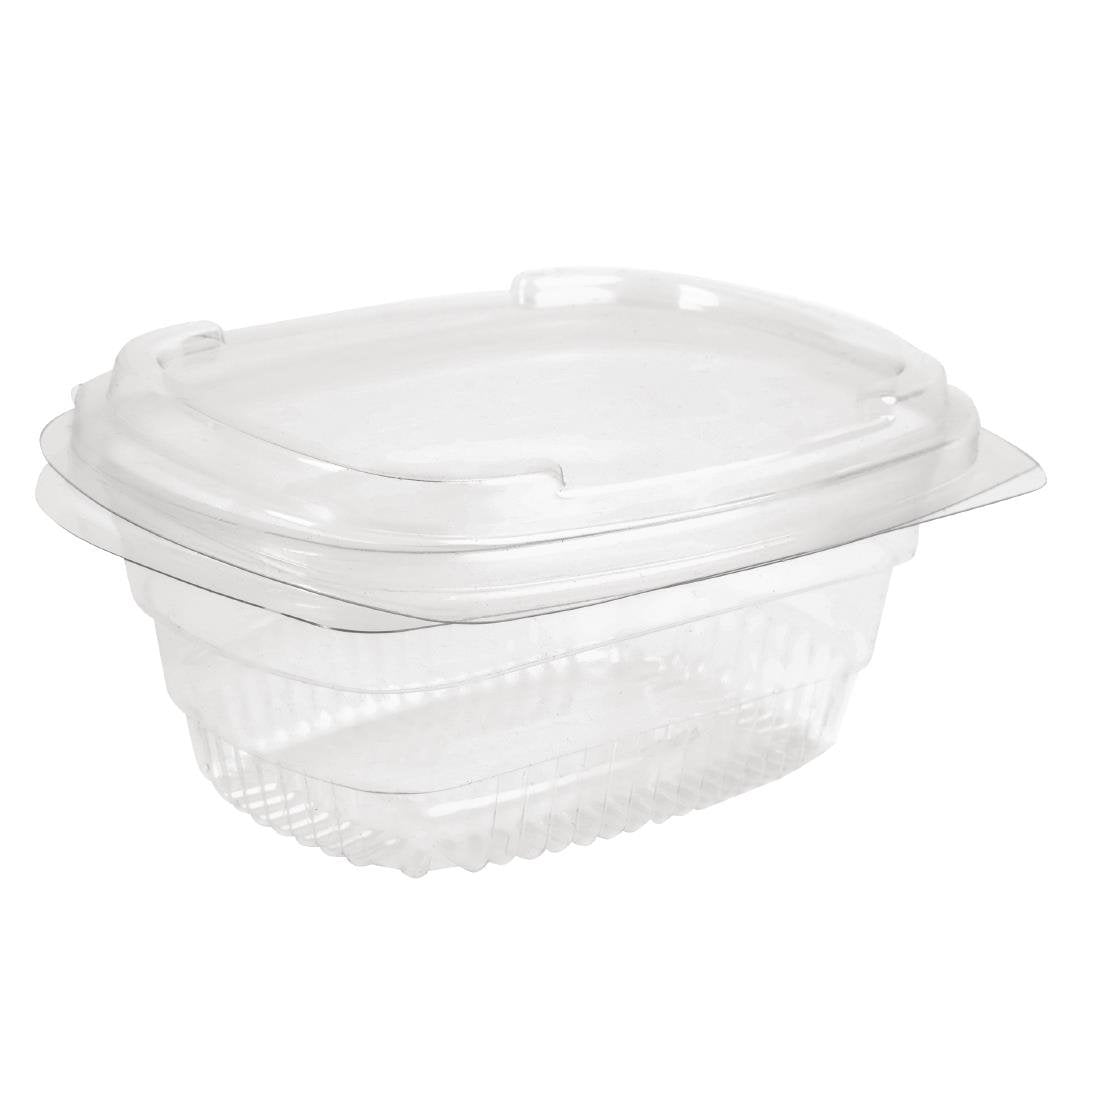 1000cc Fresco salad container recyclable x 300